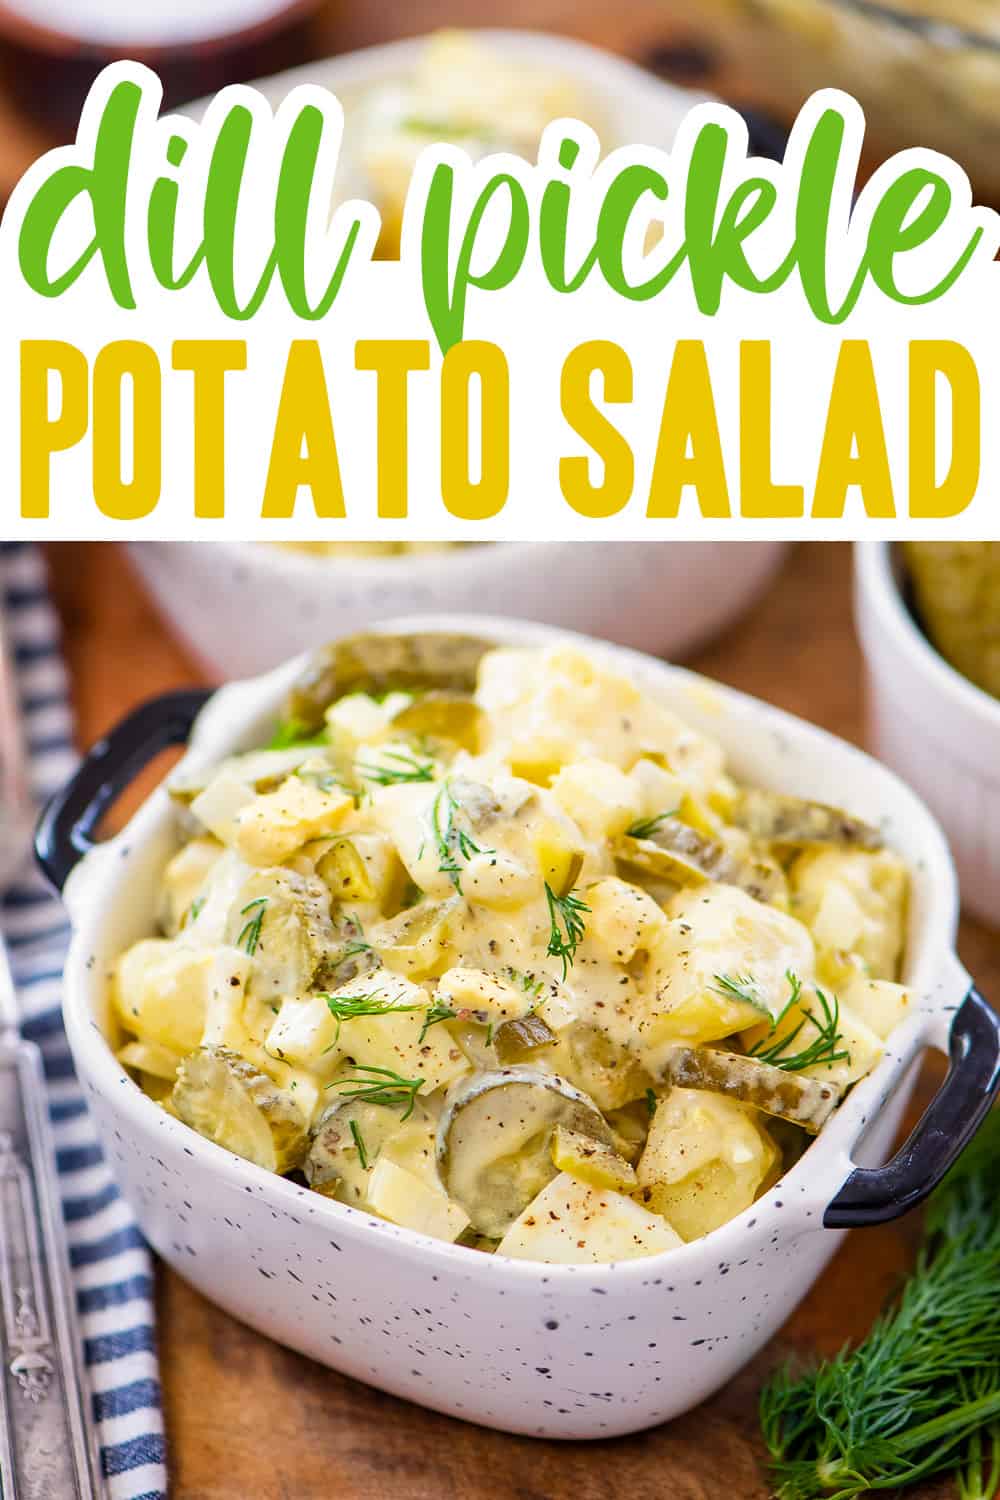 Potato salad with pickles in small dish.